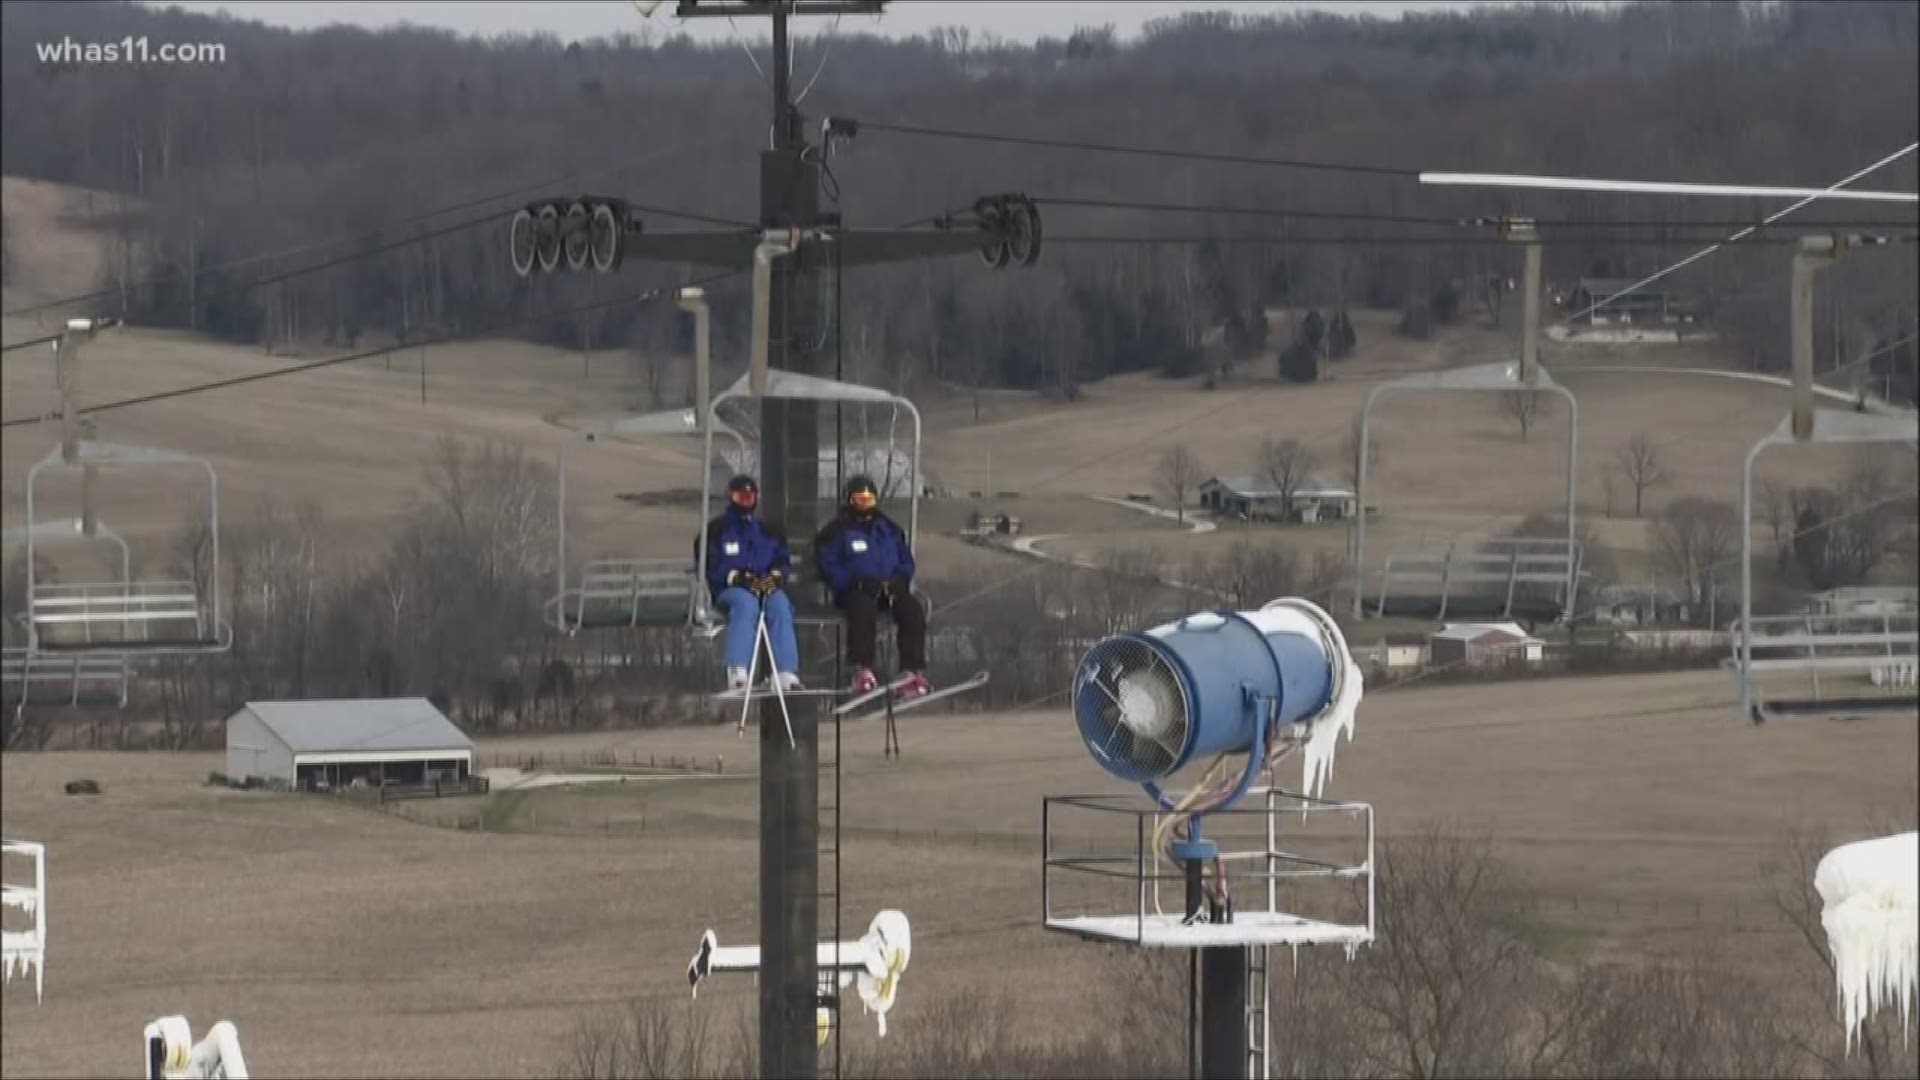 The resort had to close because of warm weather during December. Paoli Peaks opened today.